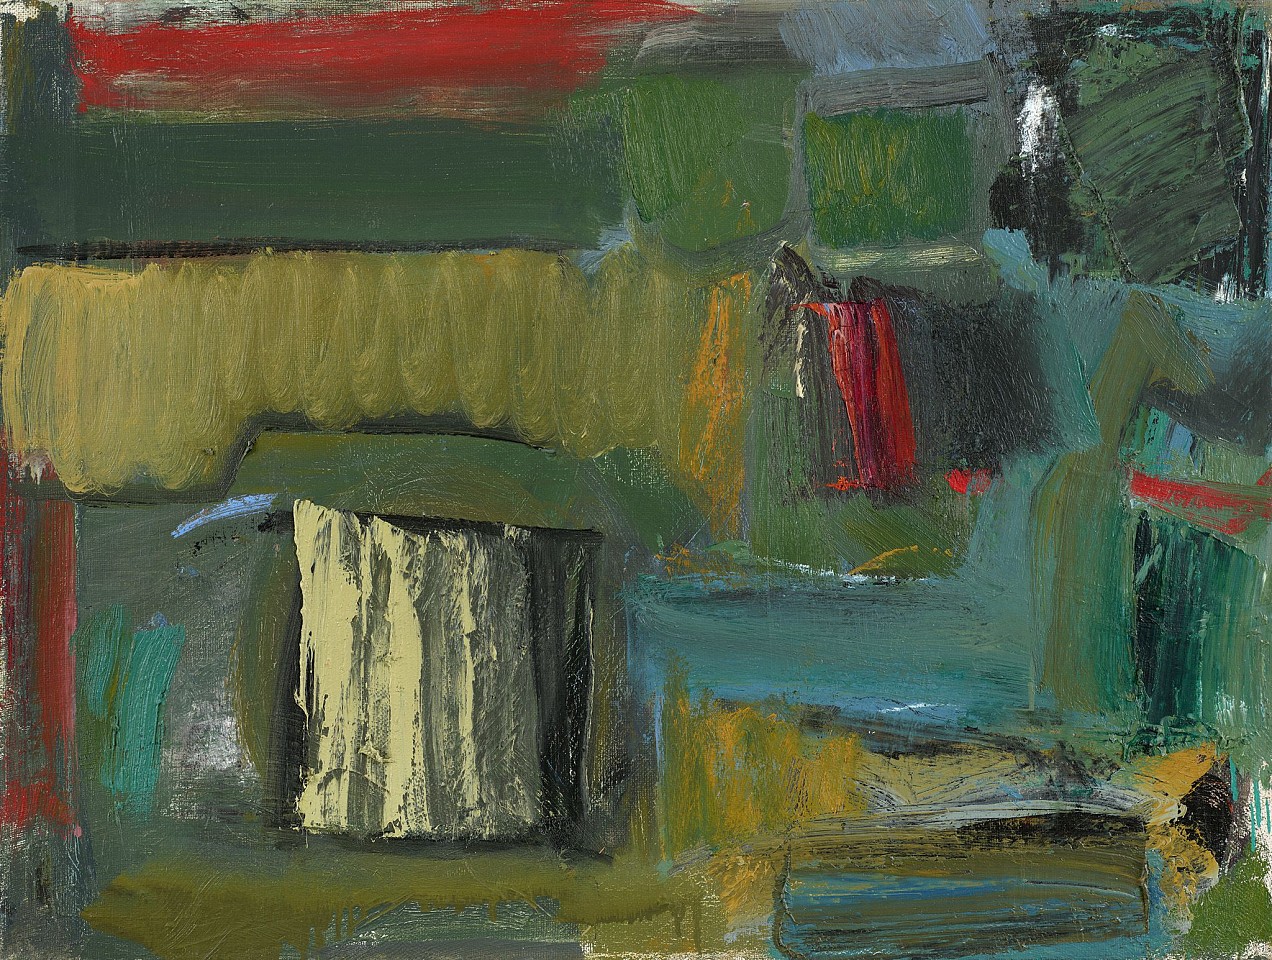 Yvonne Thomas, Untitled | SOLD, 1957
Oil on linen, 18 x 24 in. (45.7 x 61 cm)
THO-00091